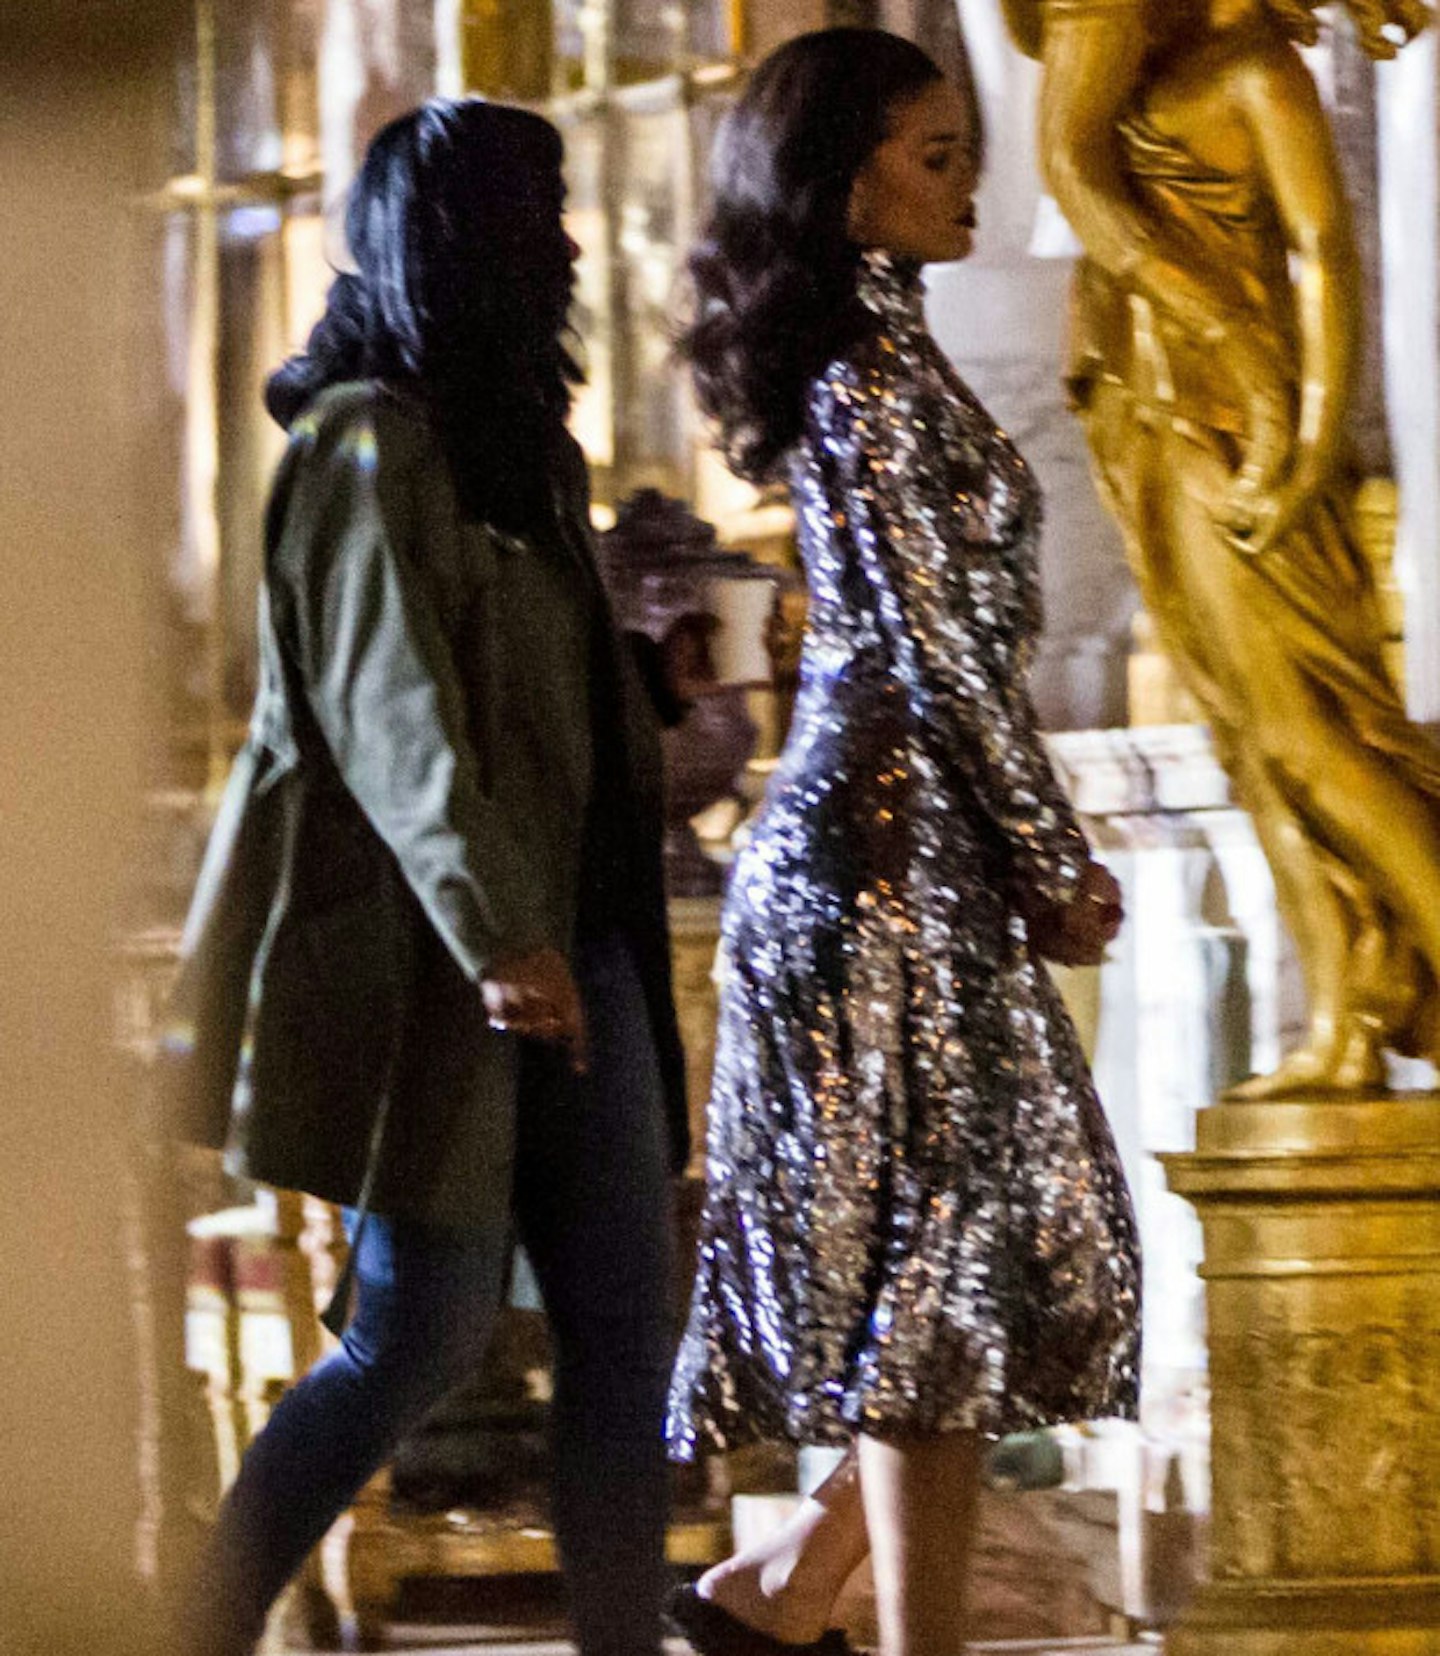 Rihanna was spotted filming at Palace of Versailles recently